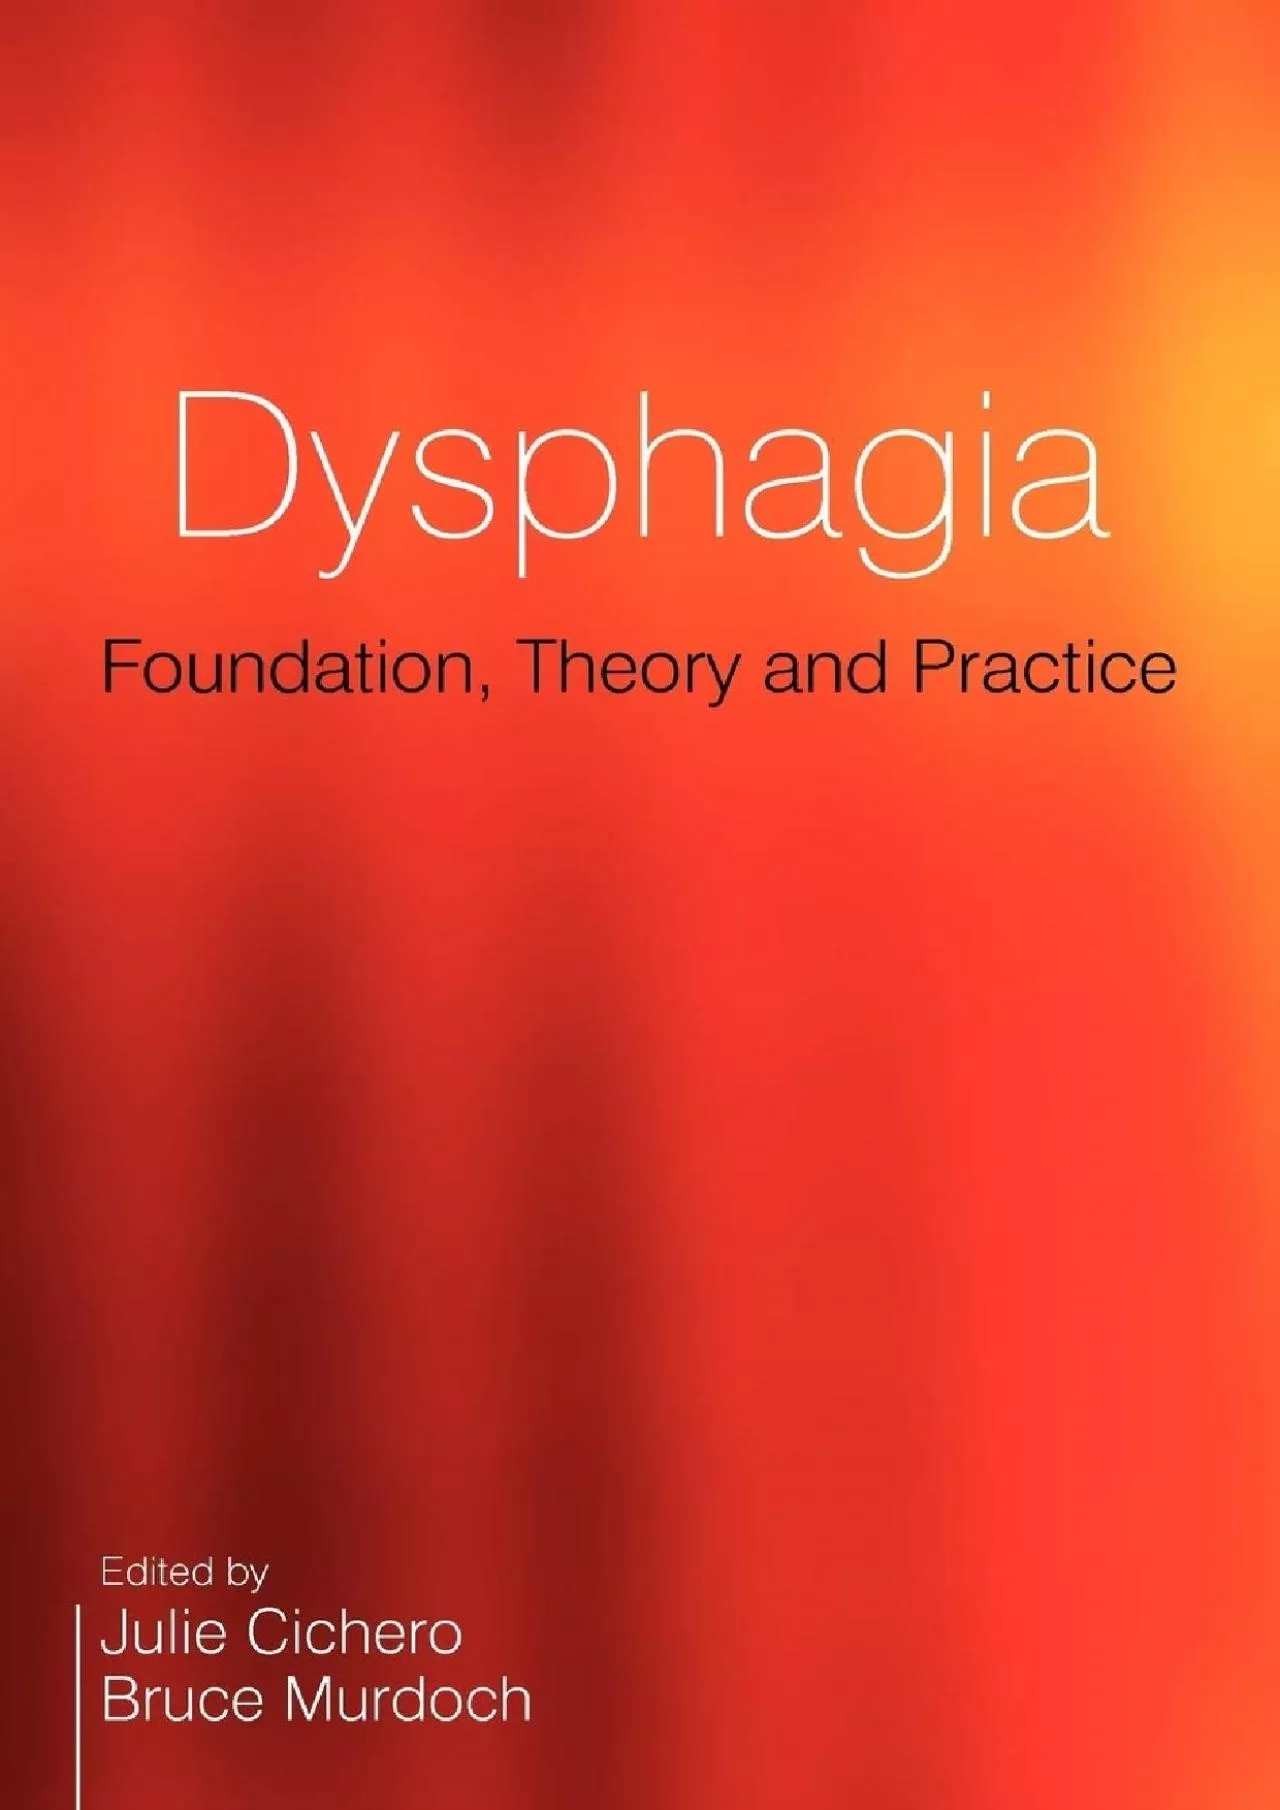 (BOOK)-Dysphagia: Foundation, Theory and Practice